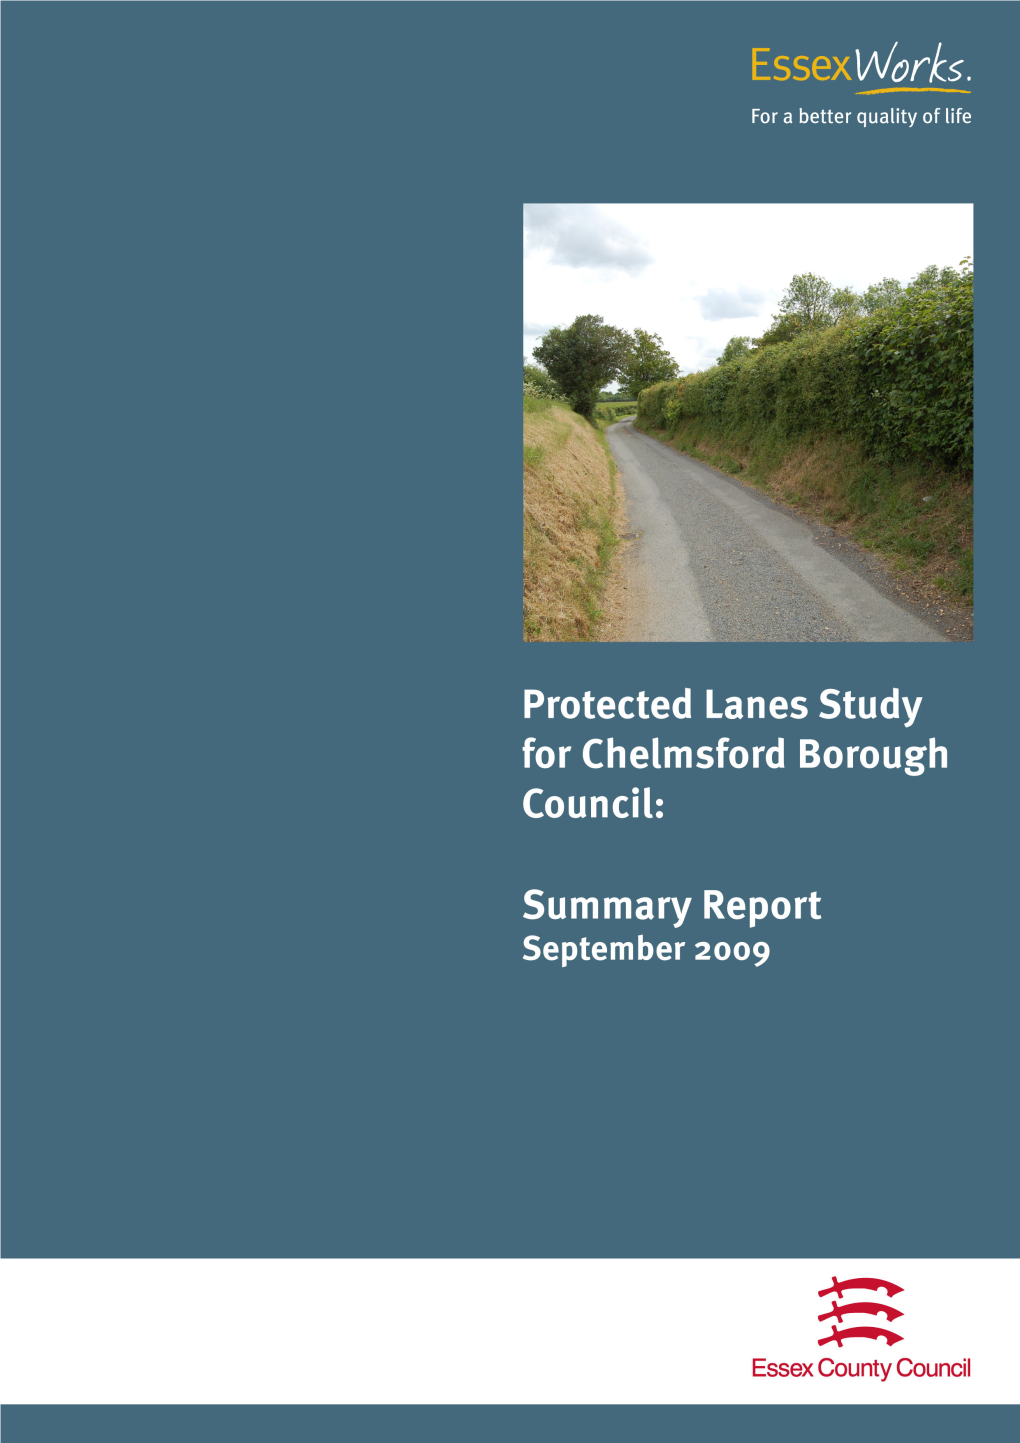 Protected Lanes Study for Chelmsford Borough Council: Summary Report